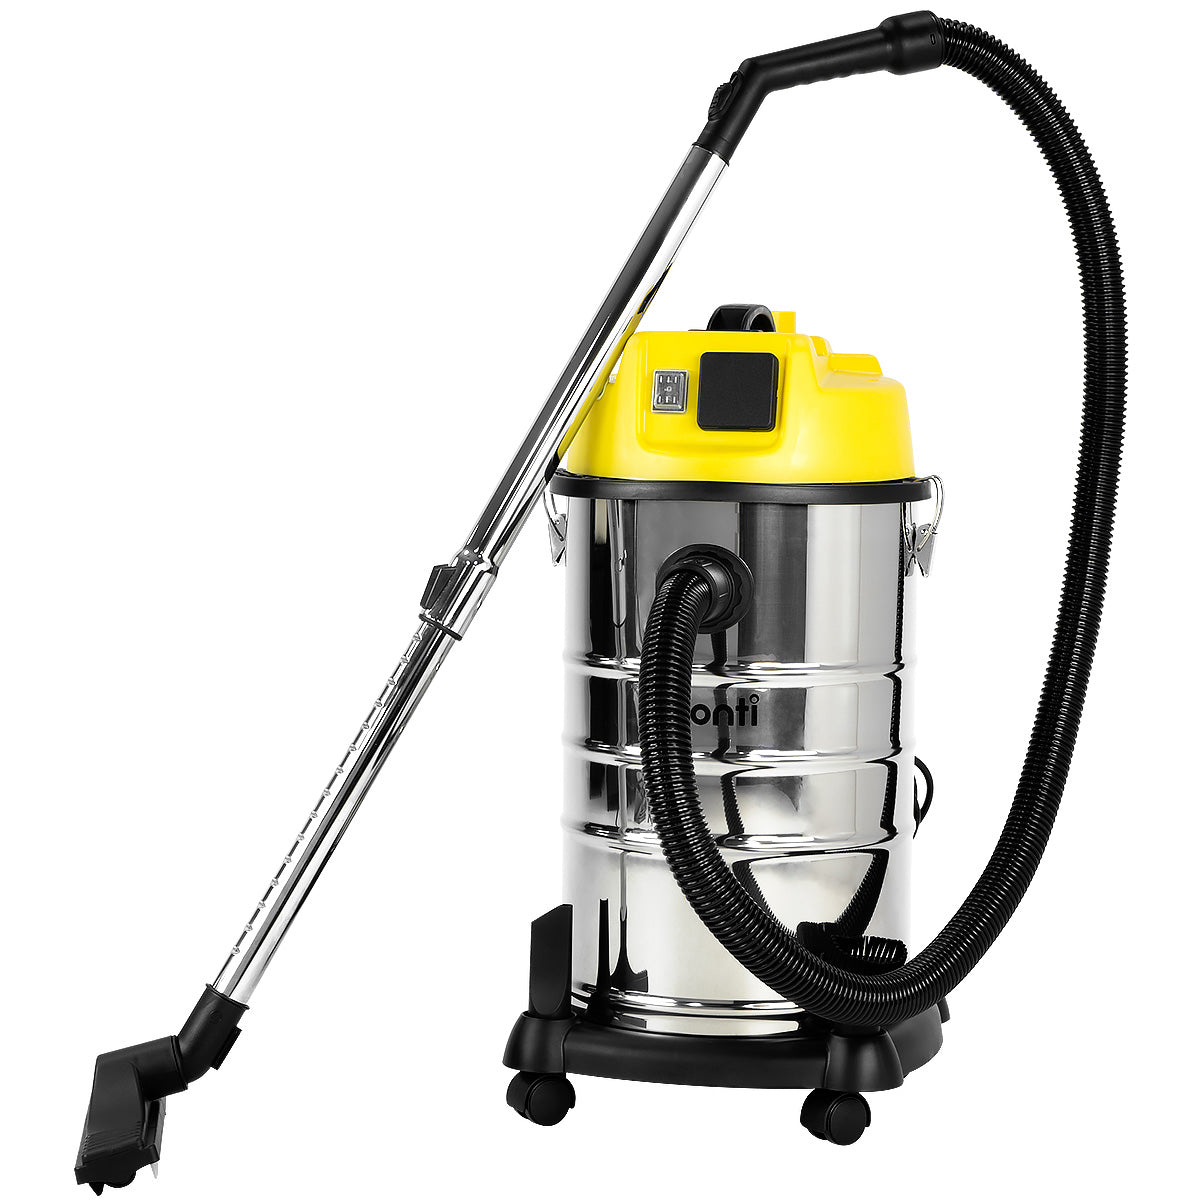 Pronti 30L 1200W Stainless Steel Wet Dry Vacuum Cleaner - Yellow